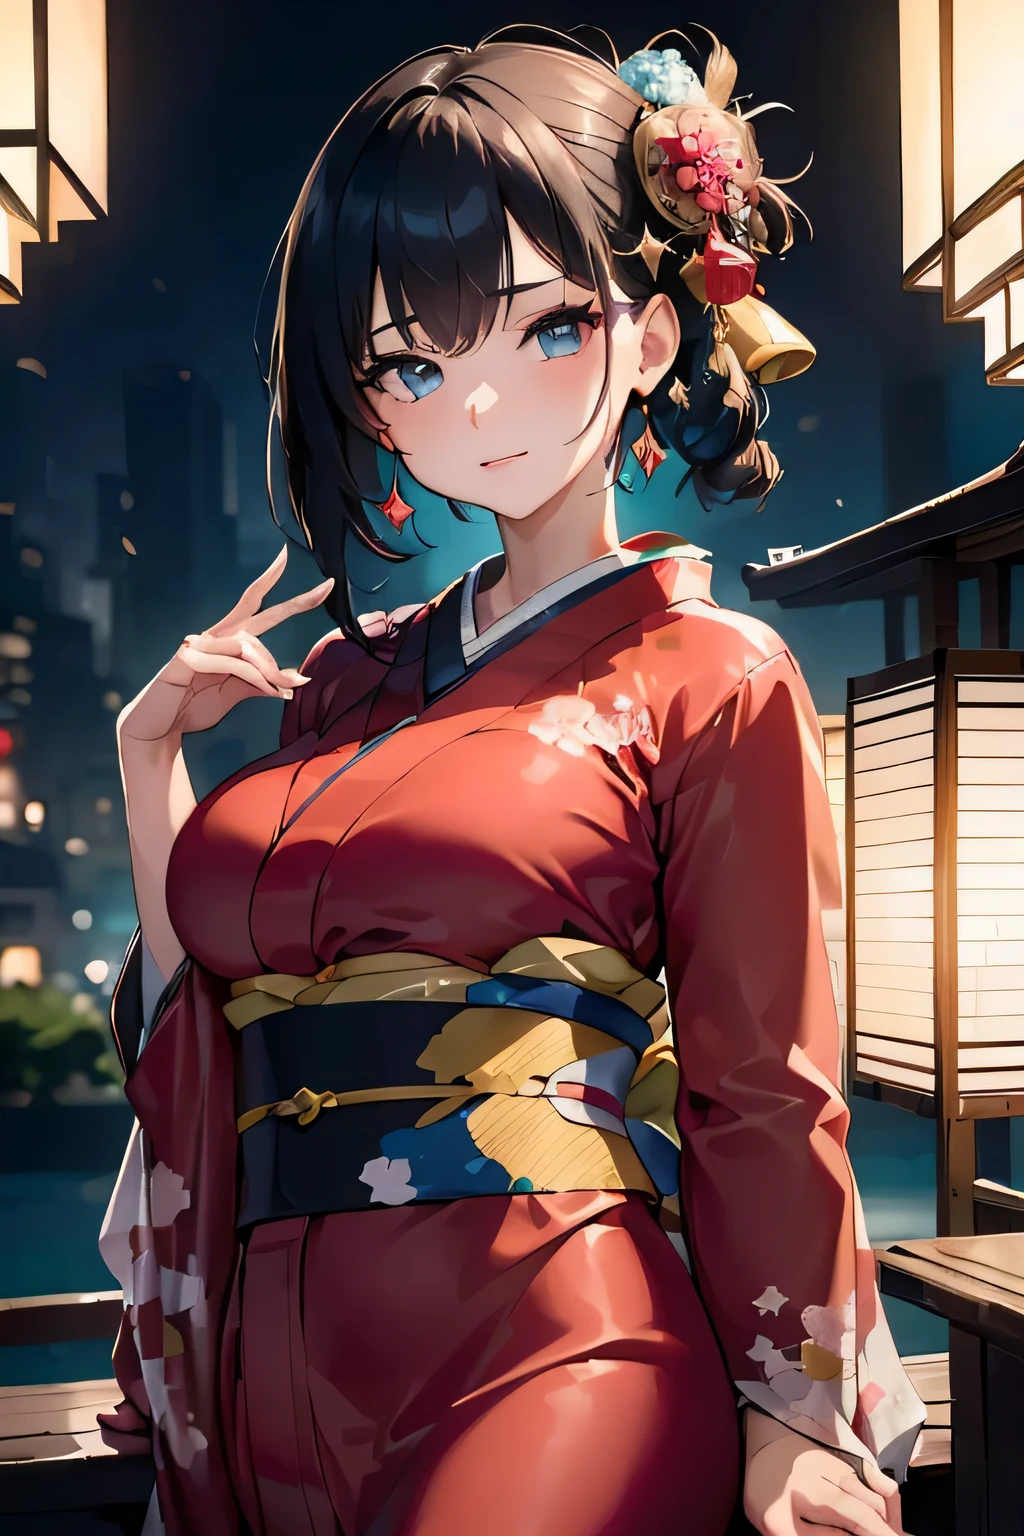 (((Gorgeous courtesan kimono:1.7))),(Beautiful mature woman dressed as an aristocrat&#39;s courtesan),(((A flashy and extravagant courtesan&#39;s costume:1.3))),(Glamorous Jar)(Gorgeous floral hair ornament),Gorgeous floral braided top knot,(Very delicate and beautiful hair,),(((Accentuate larger breasts:1.3))),Fireworks shooting up into the sky against the backdrop of the riverbank at night.、Cute round face,Detailed clothing features,Detailed hair features,Detailed facial features,Looking at the camera,(Dynamic Angle),(Dynamic and sexy pose),Cinematic Light,(Ultra-high resolution output images,Written boundary depth,Intricate details,Light and shadow contrast、The subject appears three-dimensional,) ,Single-lens reflex camera, (Realistic:1.3),(8K quality,Anatomically correct facial structure,),(Sea Art 2.0 mode:1.3),(Picture Mode Ultra HD,)